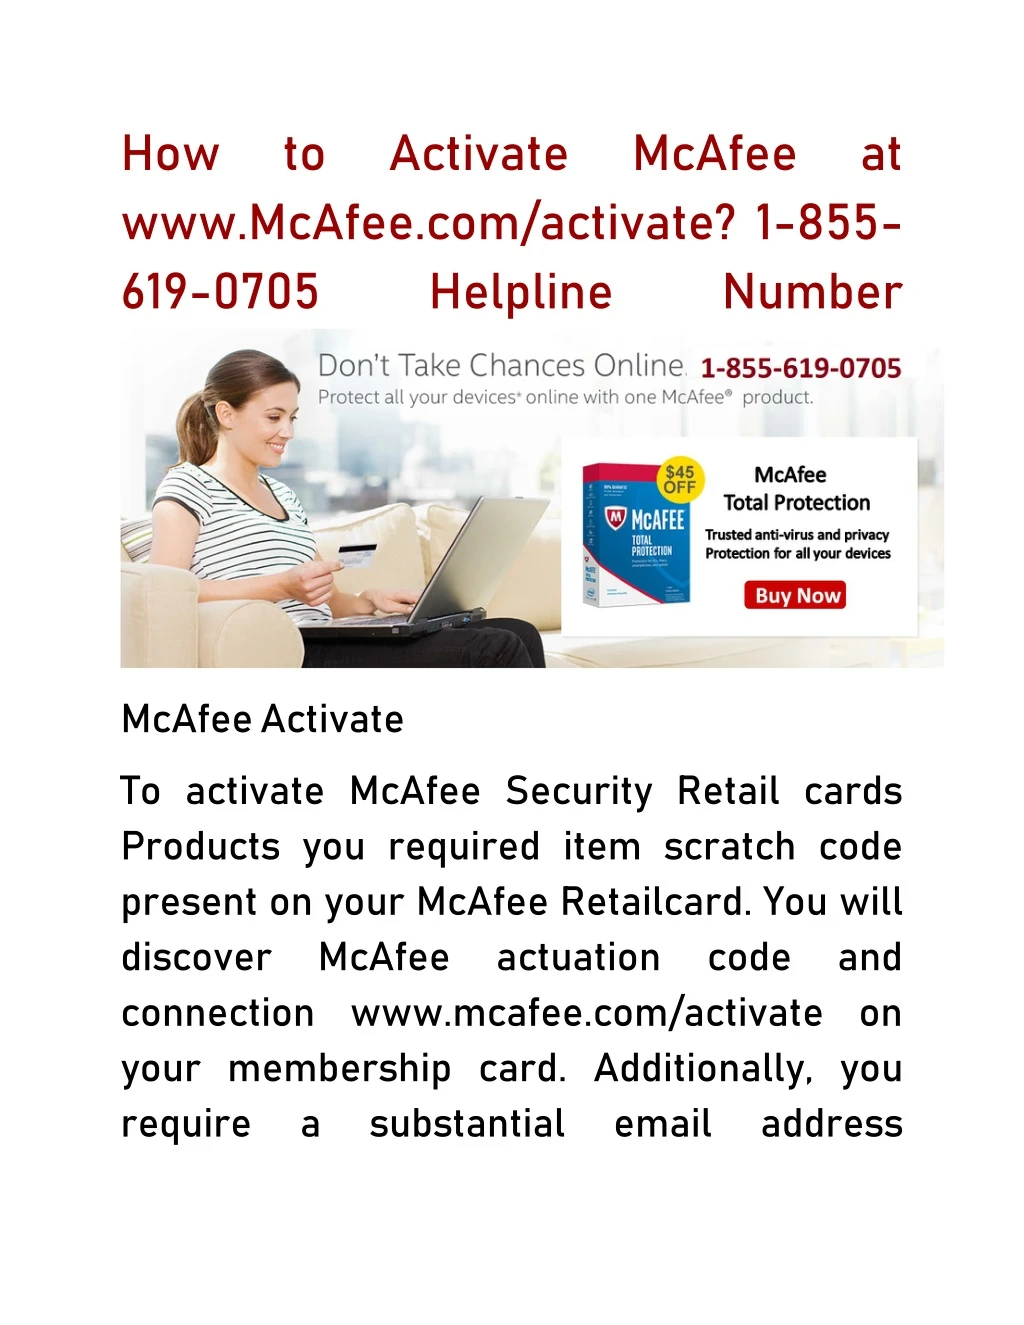 how www mcafee com activate 1 855 619 0705